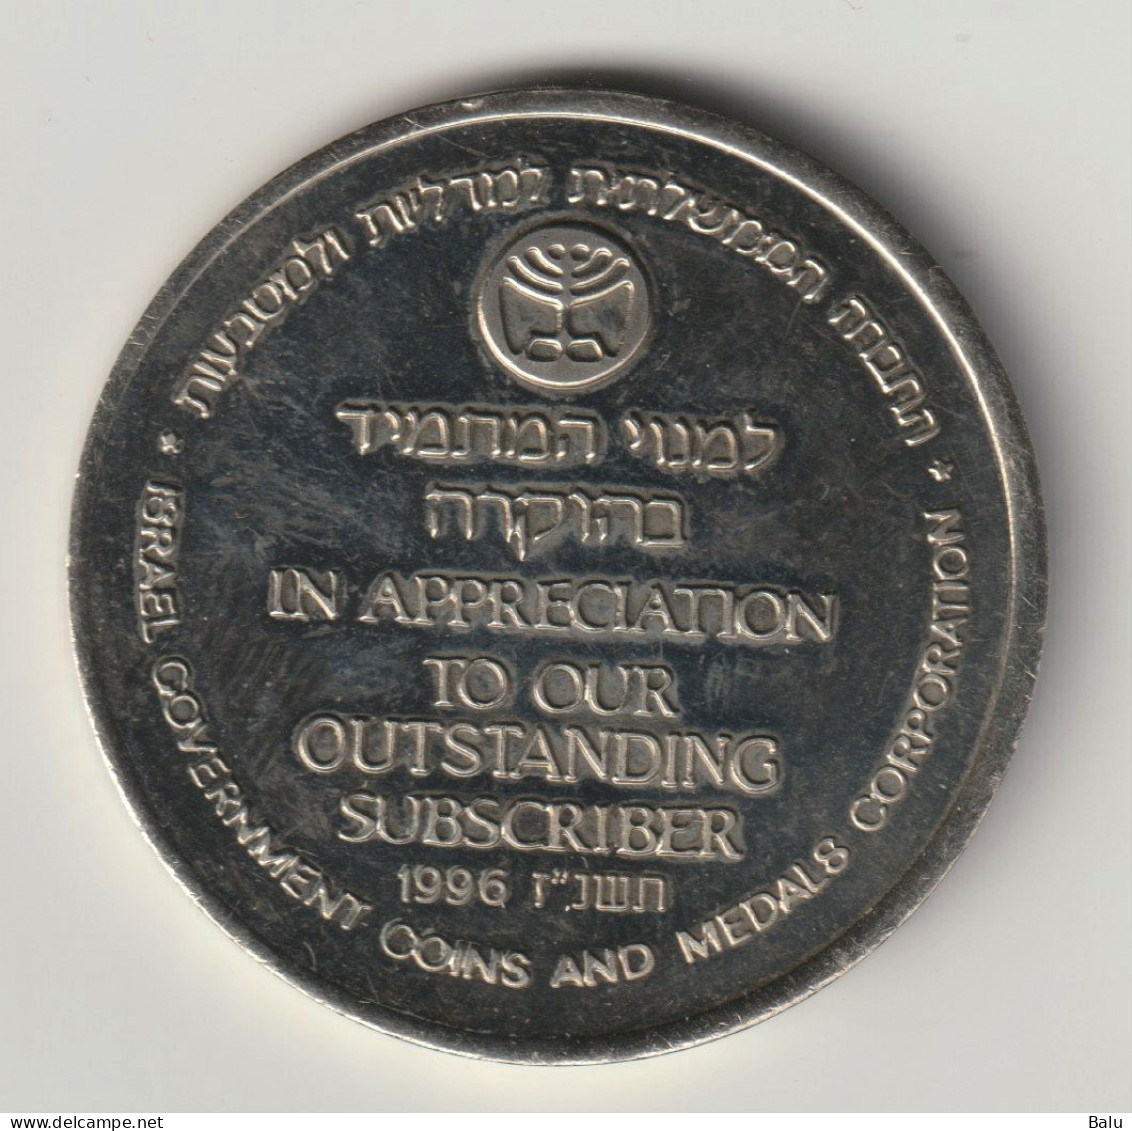 1996 Medaille. Israel. In Appreciation To Our Outstanding Subscribers. ... And The Bush Was Not Consumed - Israël